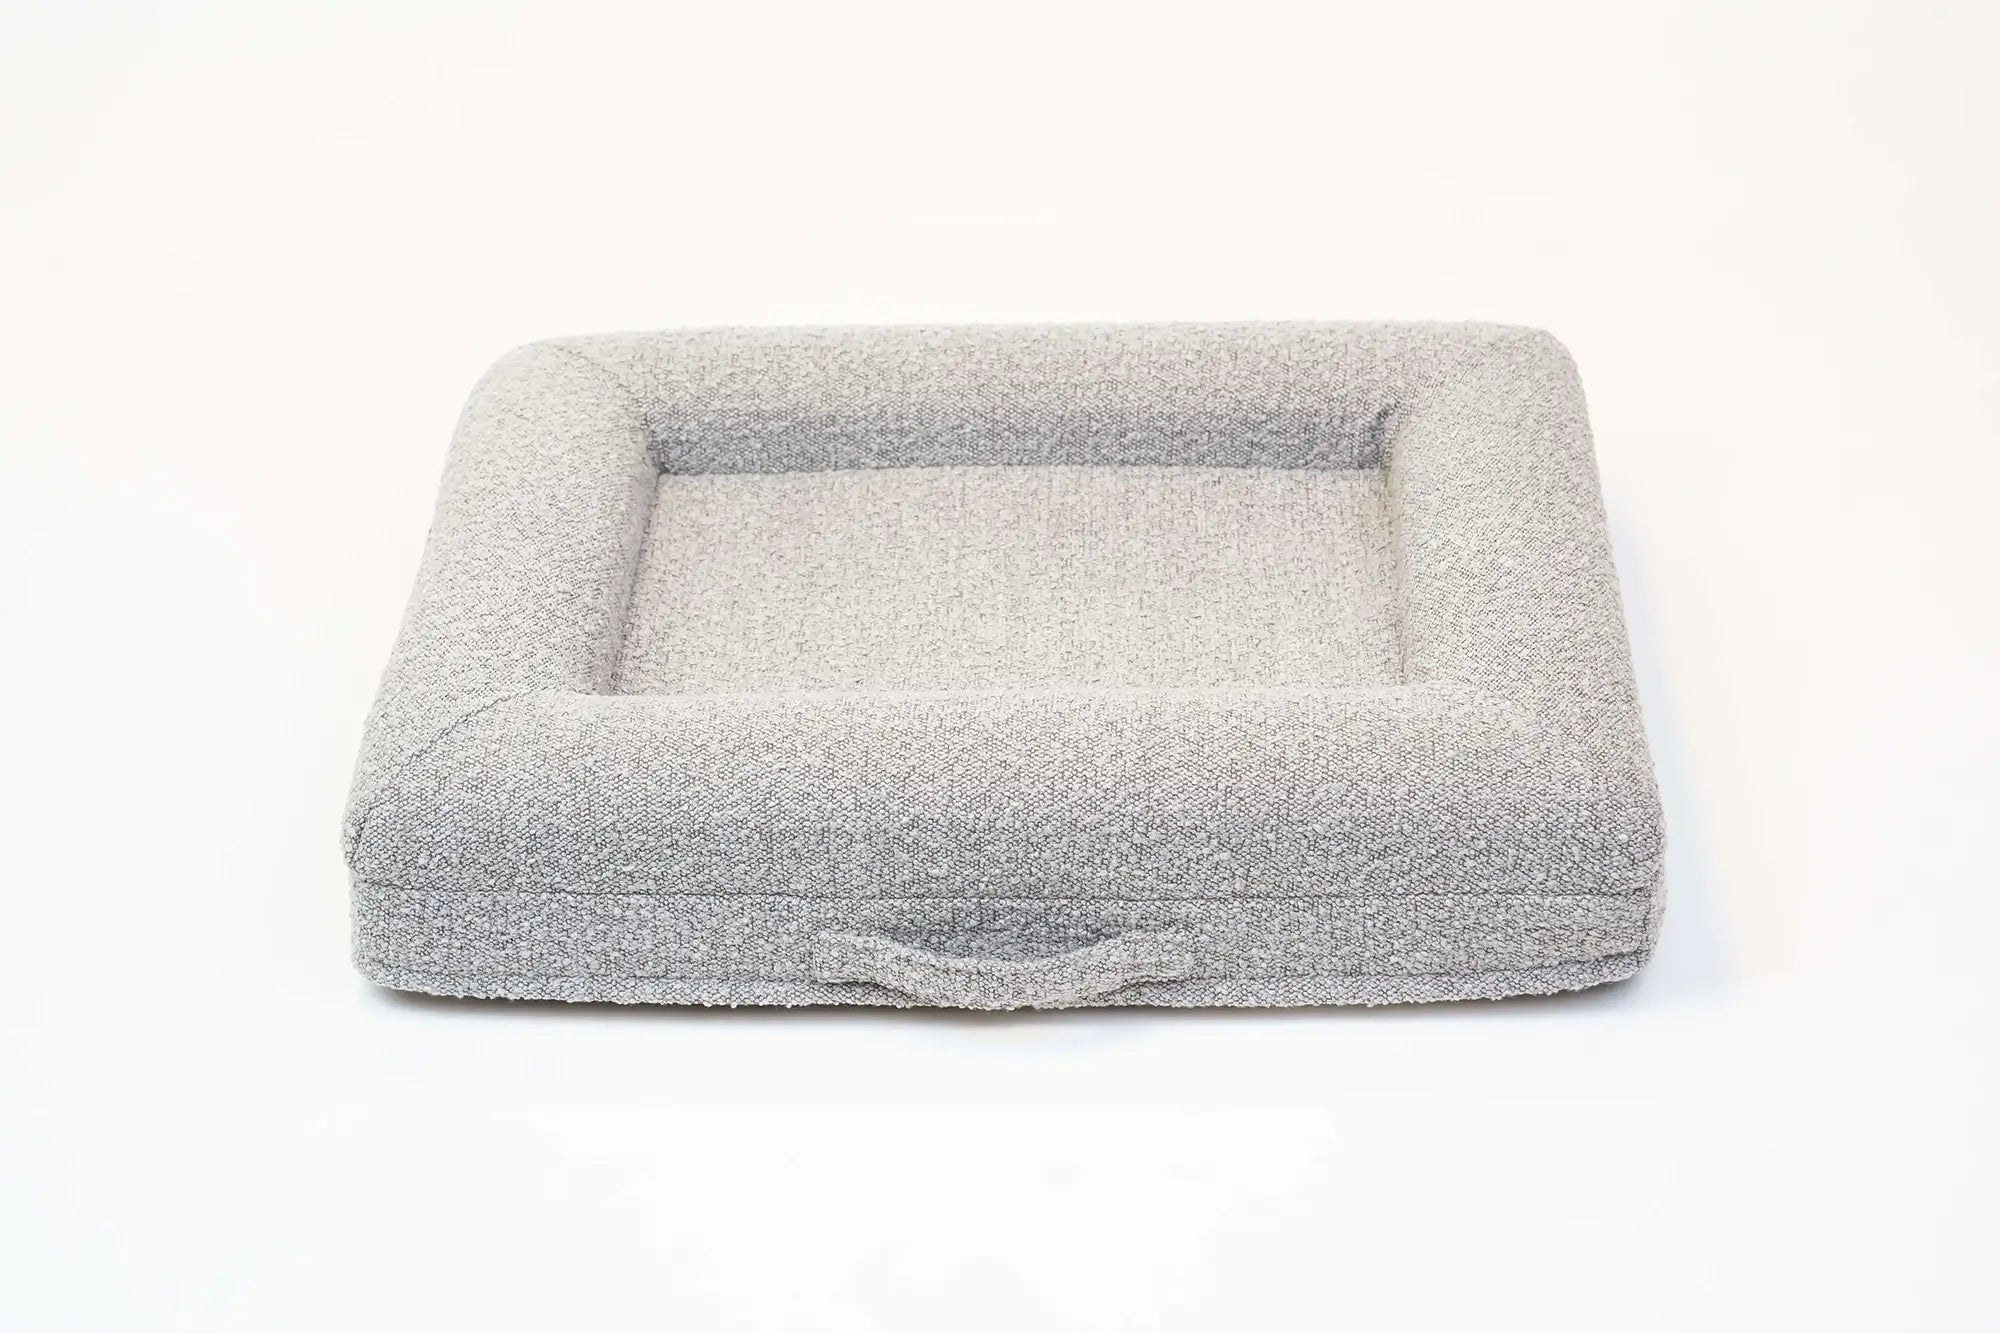 Back of a small, sand-colored orthopedic memory foam boucle dog bed with bolsters and a handle for easy transport.